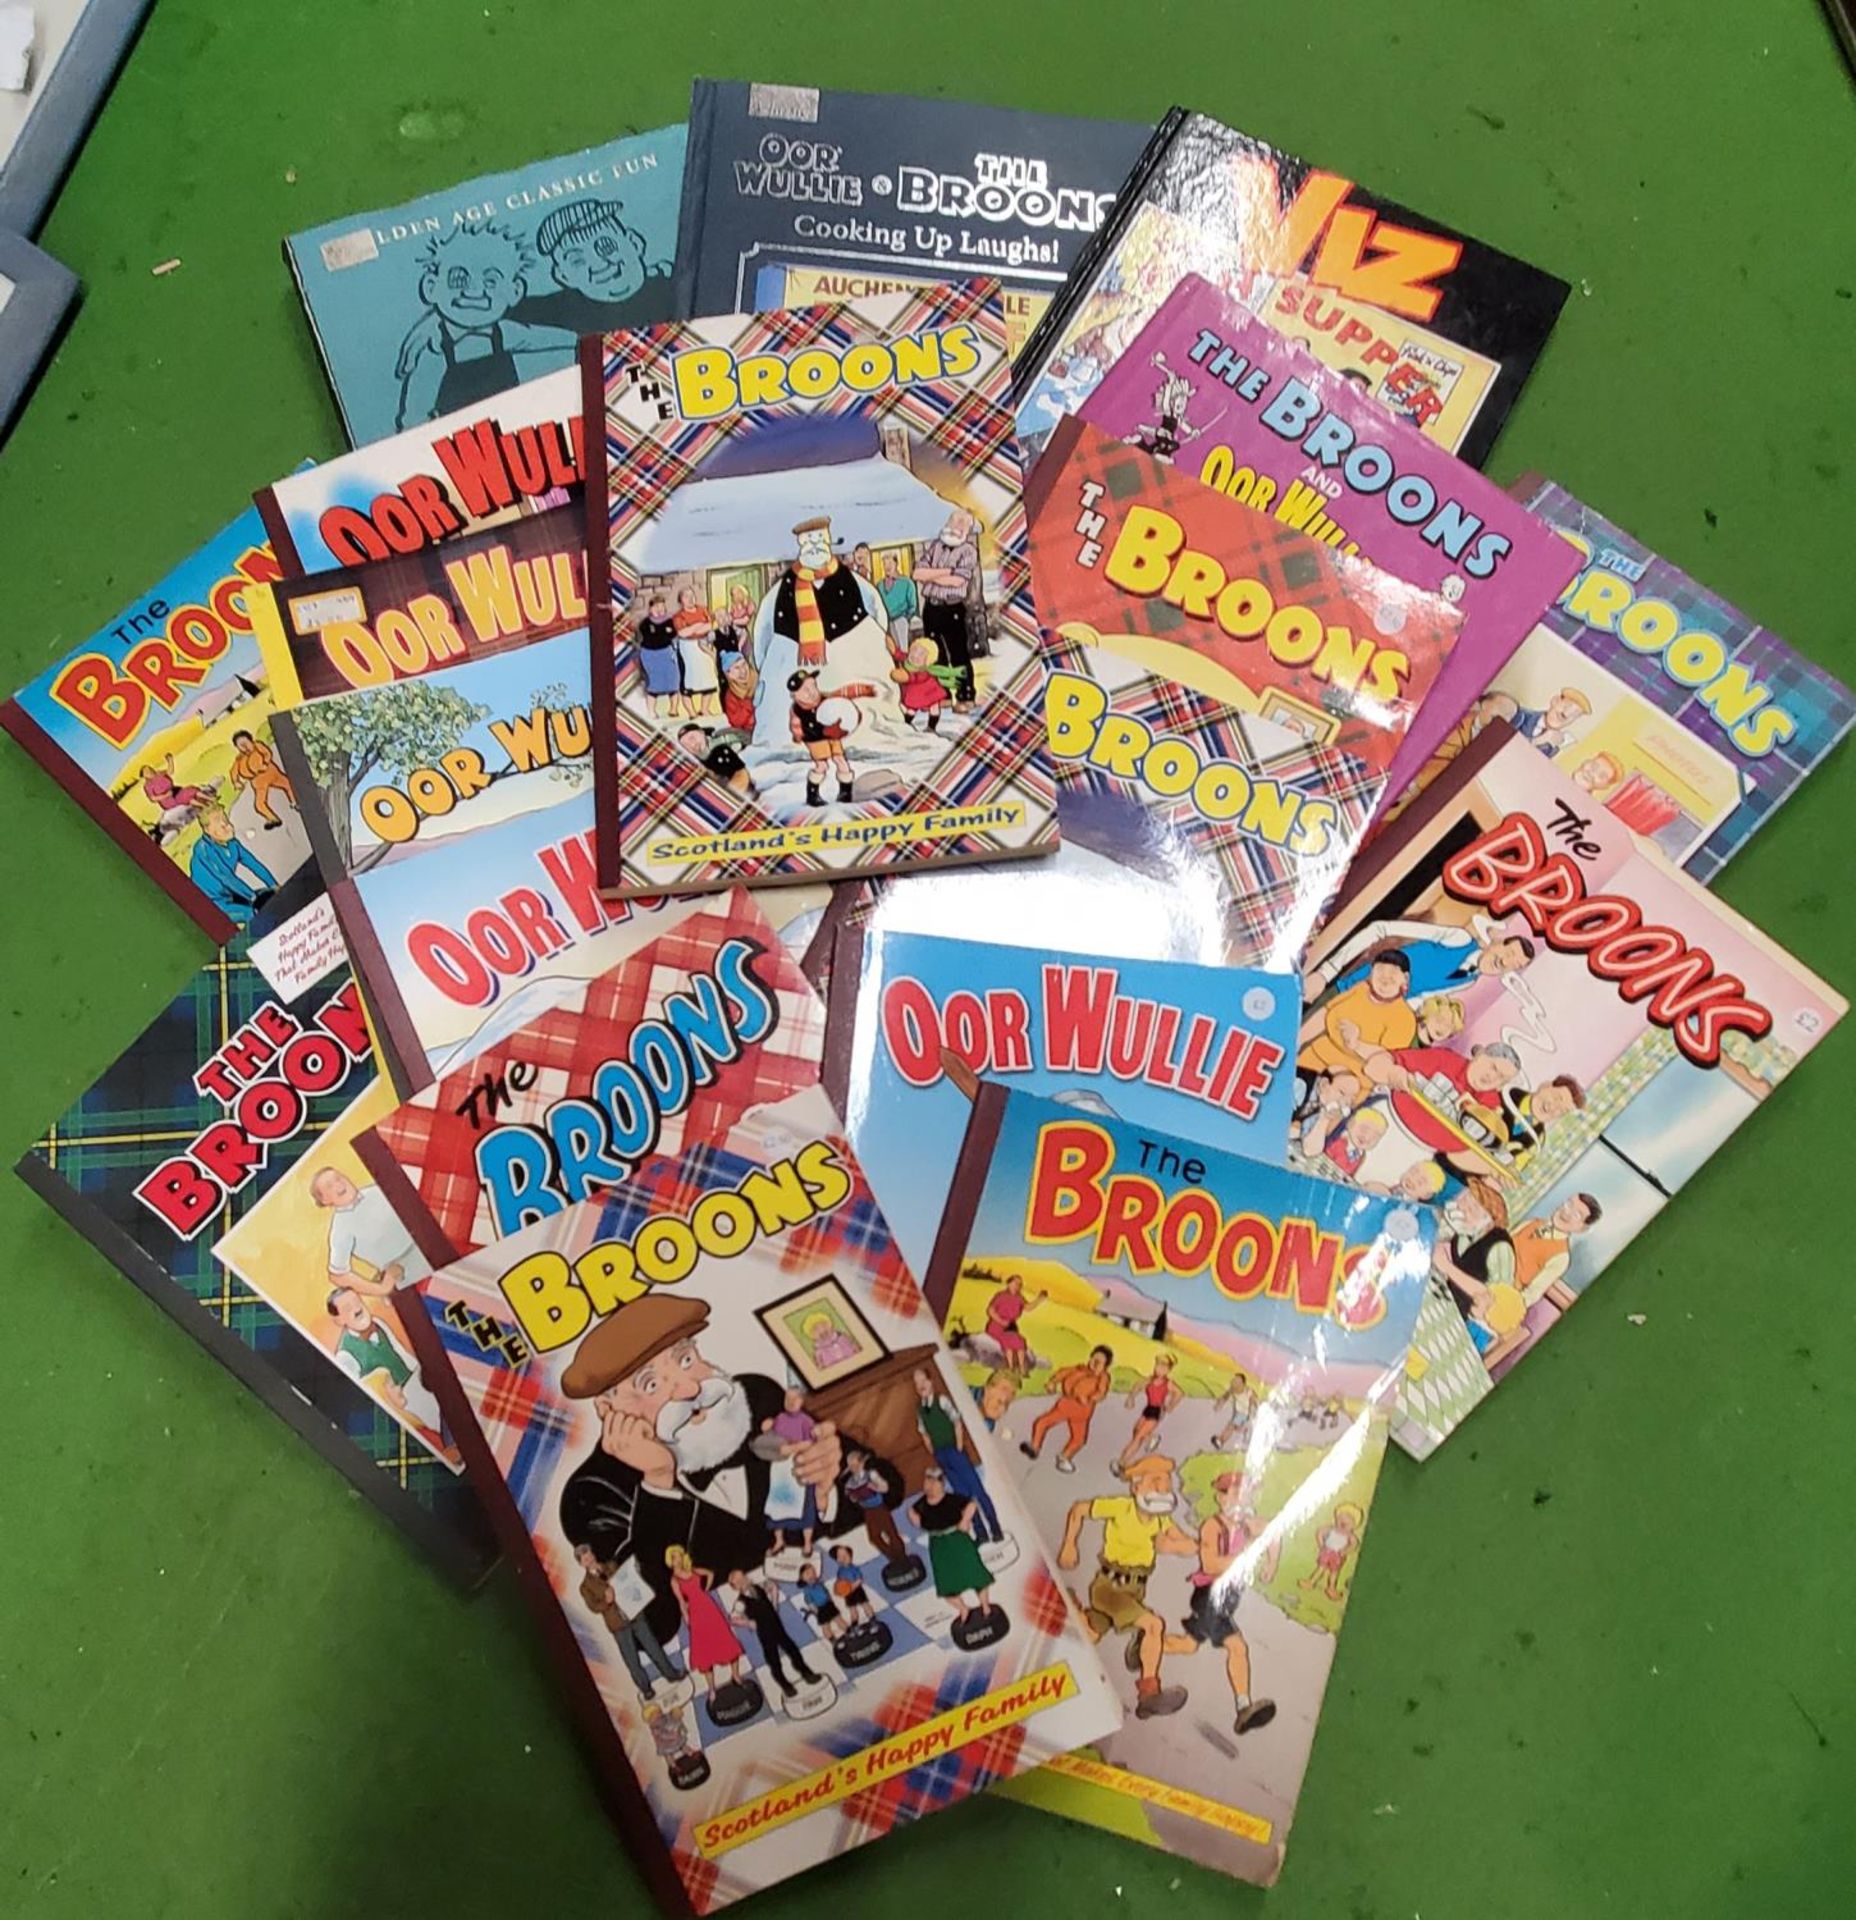 A COLLECTION OF 'THE BROONS', 'OOR WULLIE' AND VIZ